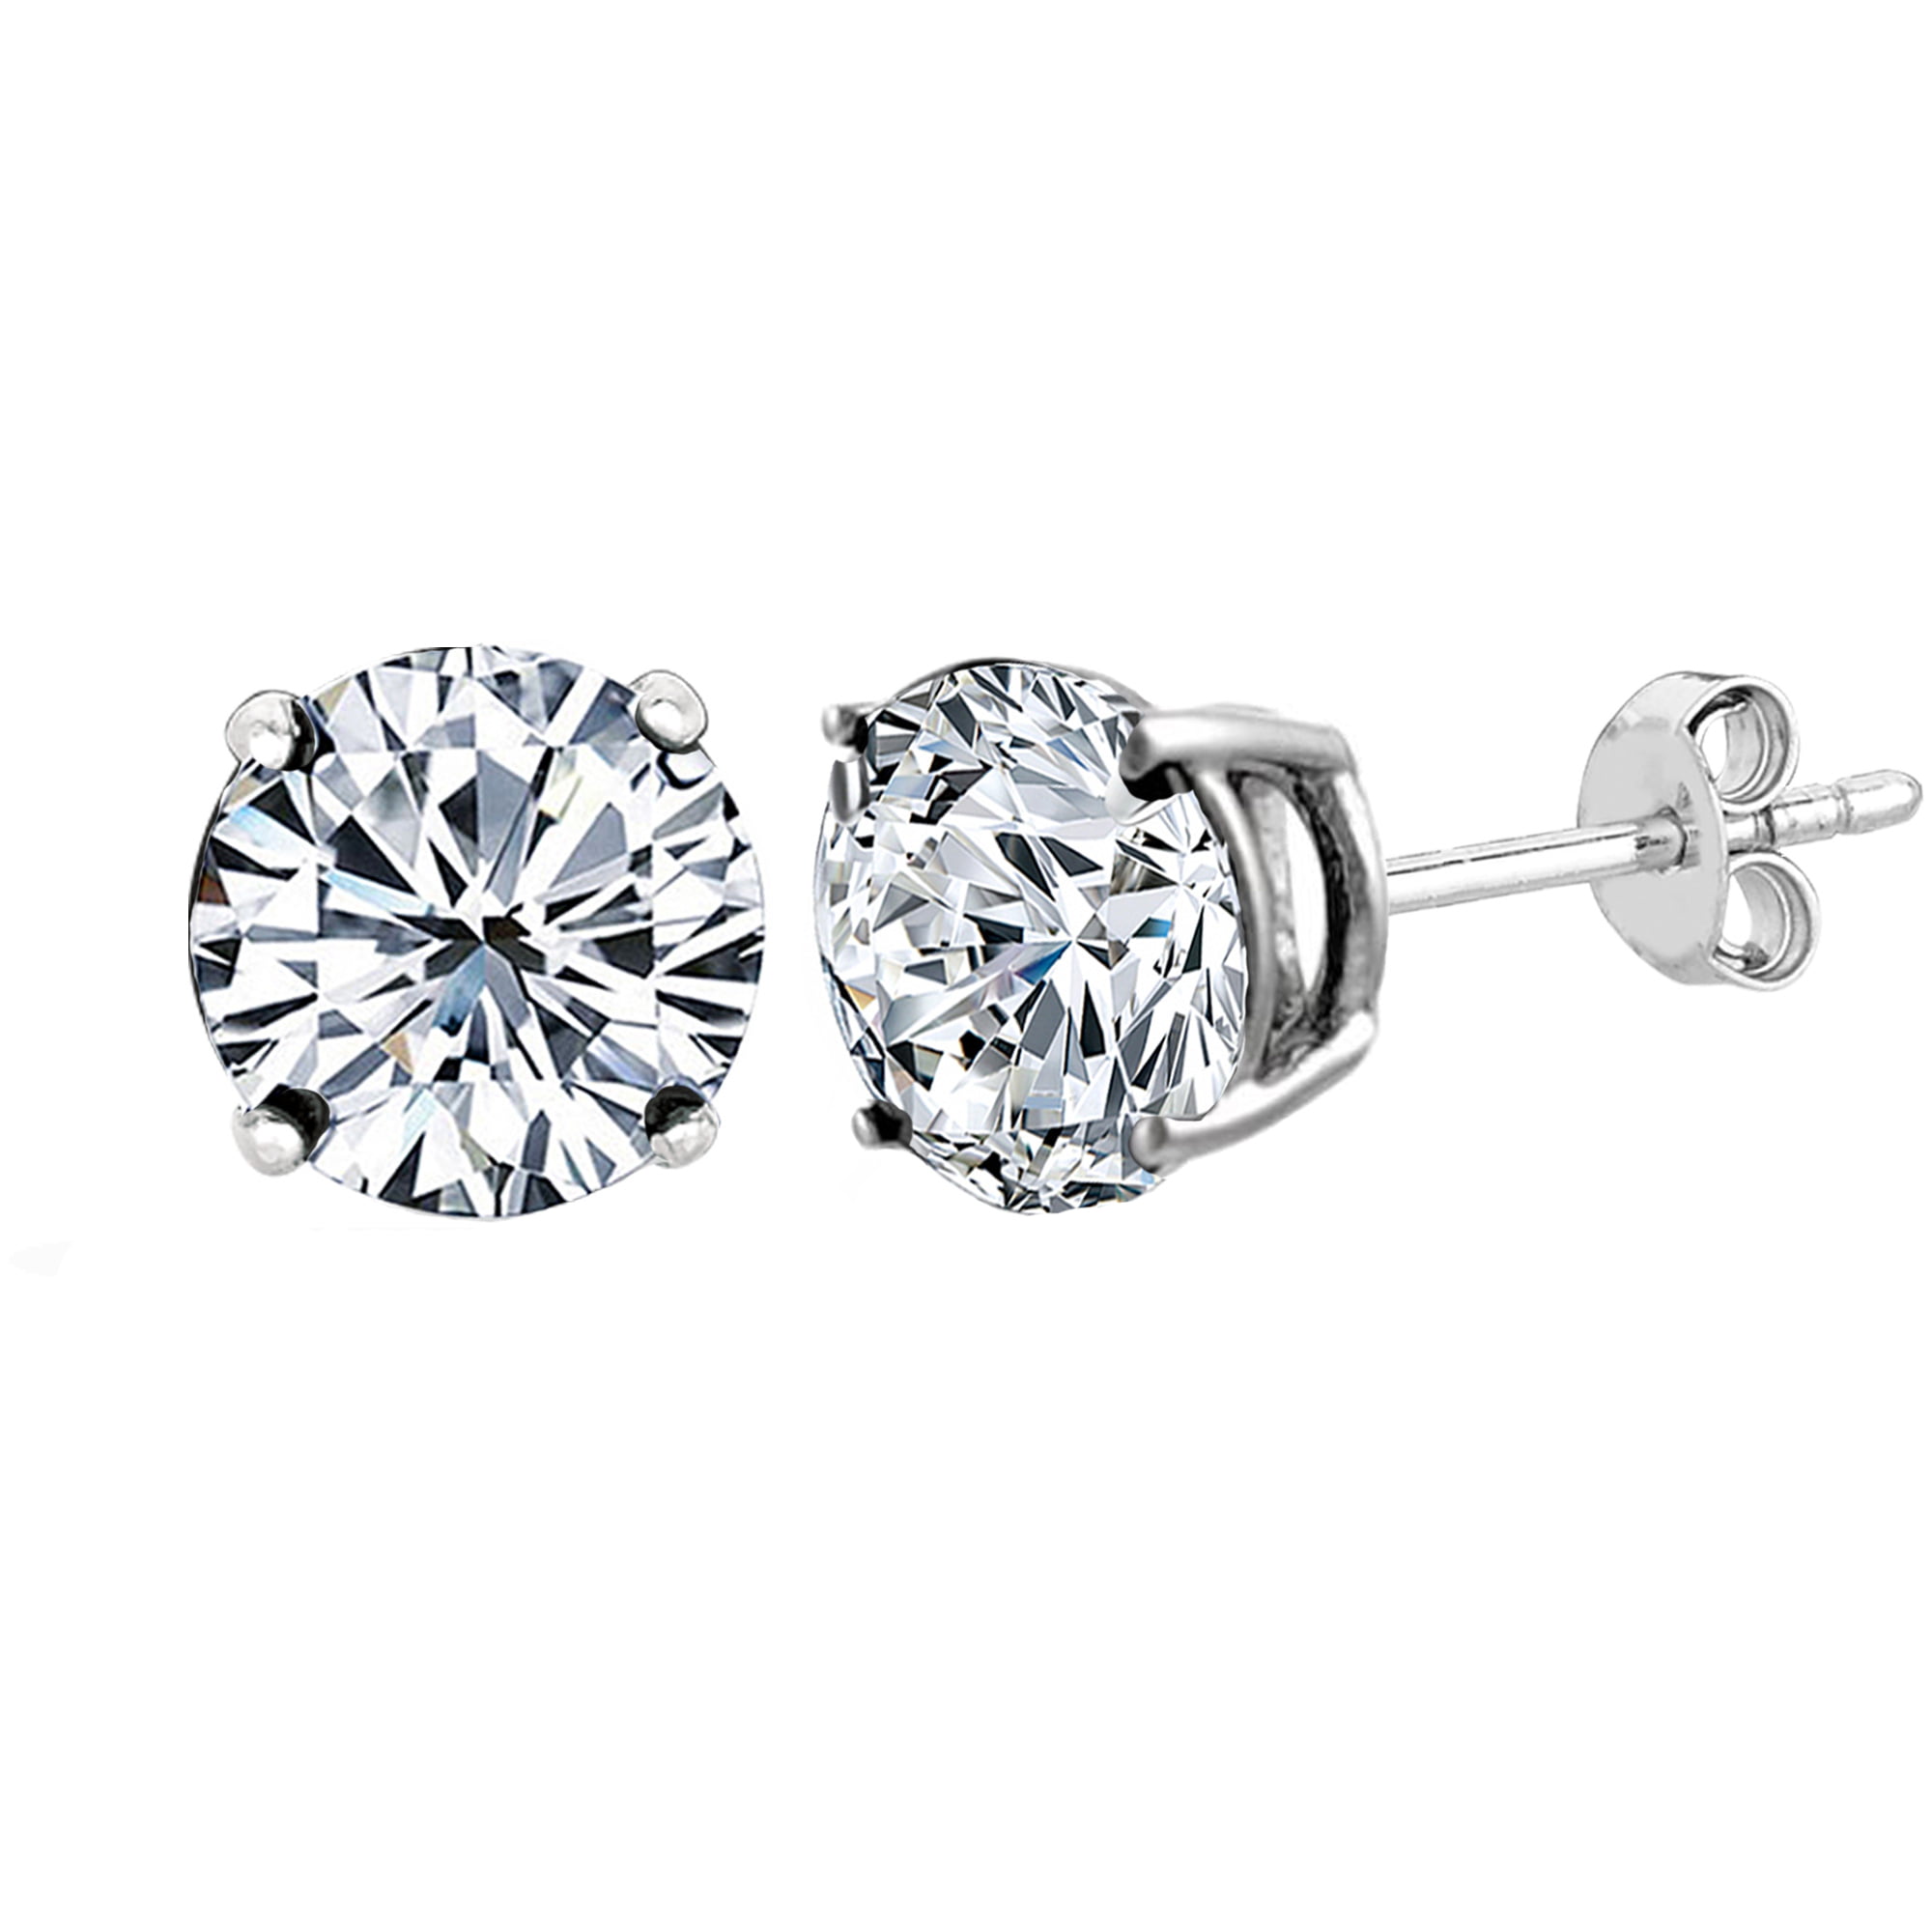 14k White Gold Round Cut White Cubic Zirconia Stud Earrings, 8mm ...